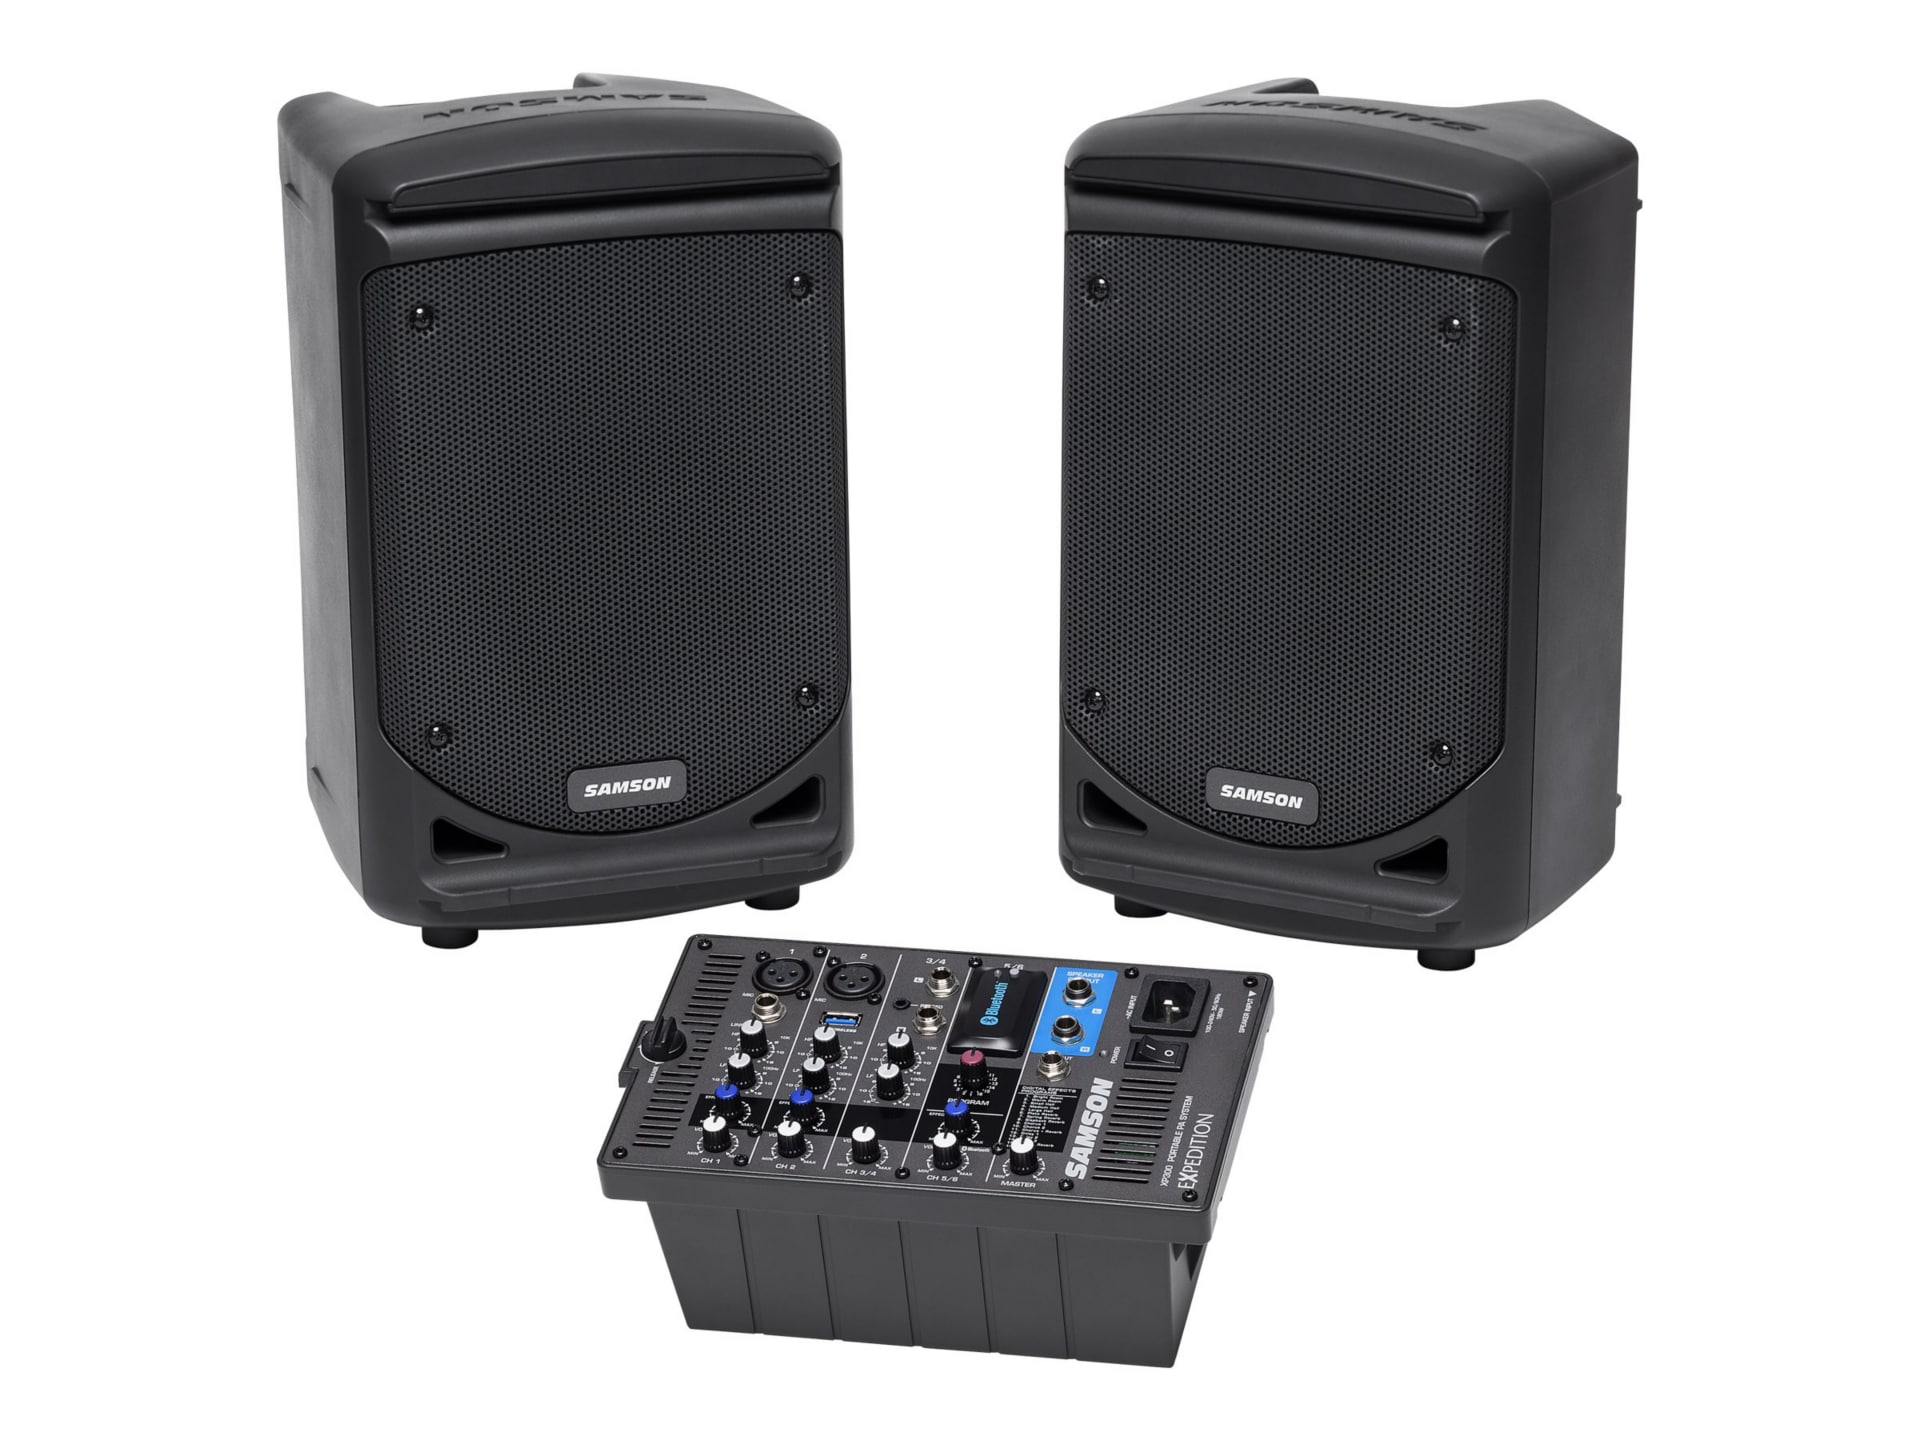 Samson Expedition XP300 - speakers - for PA system - wireless